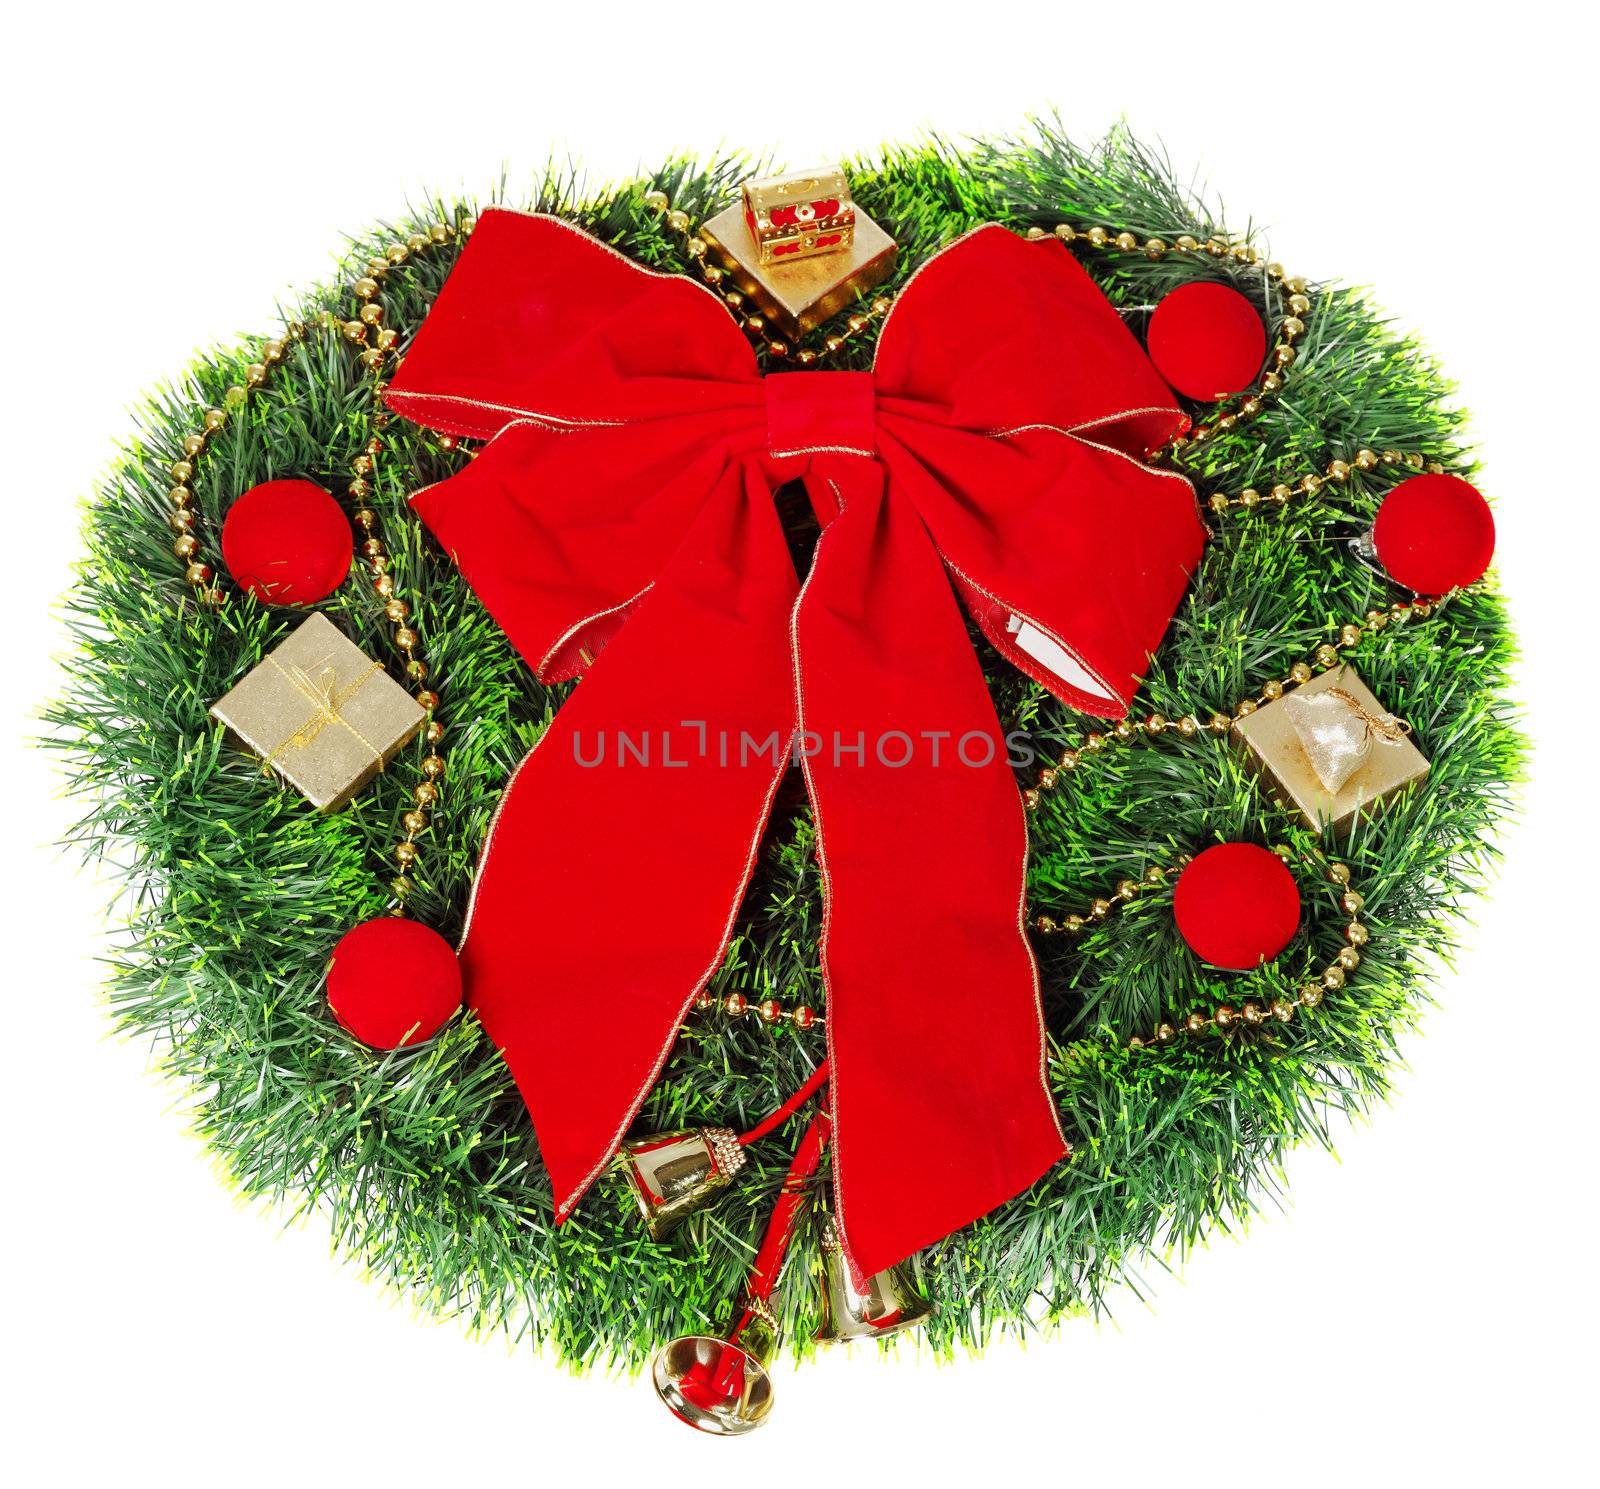 Advent Wreath, isolated on white